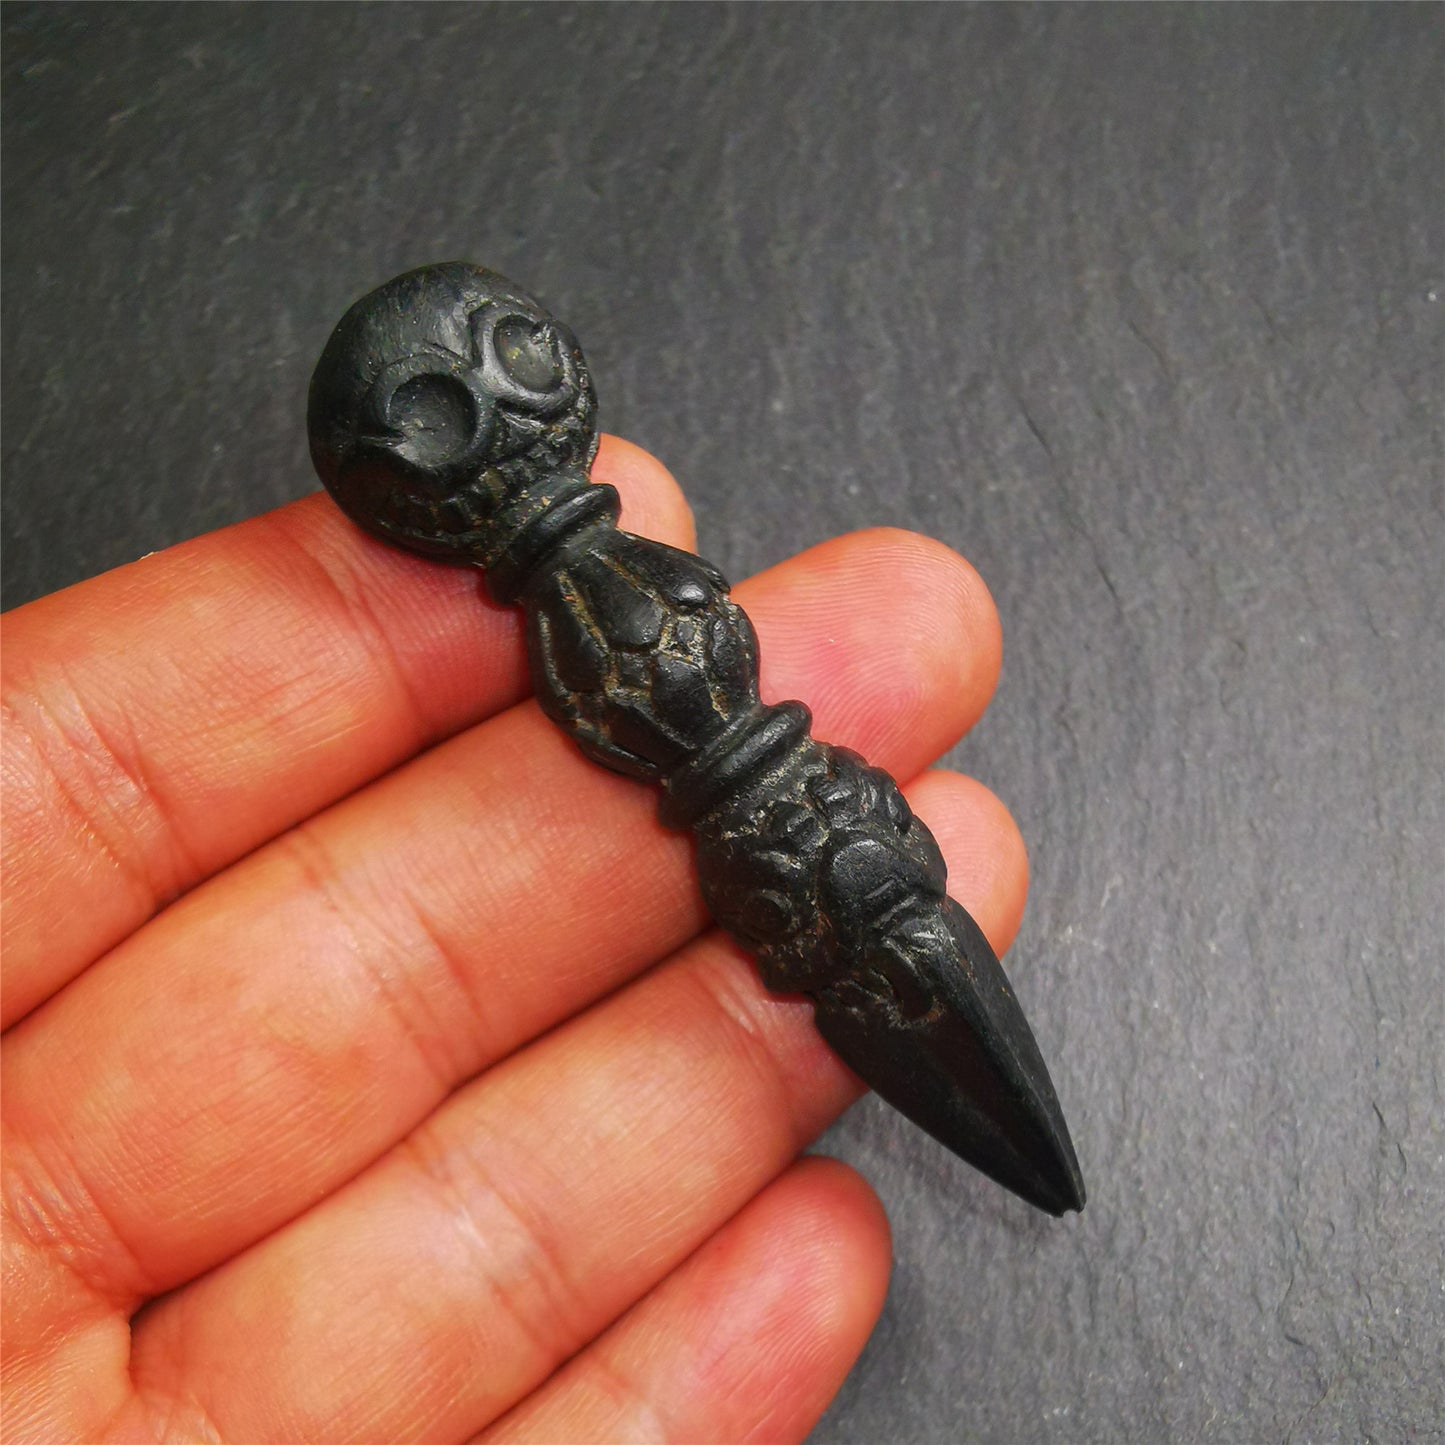 Gandhanra Unique Tibetan Buddhist Ritual Implement - Kila -Dorje Phurba,it was hand carved of natural Obsidian,total 2.83" inches.The top is Shmashana Adhipati skull shape, the middle is half vajra and the bottom is phurba